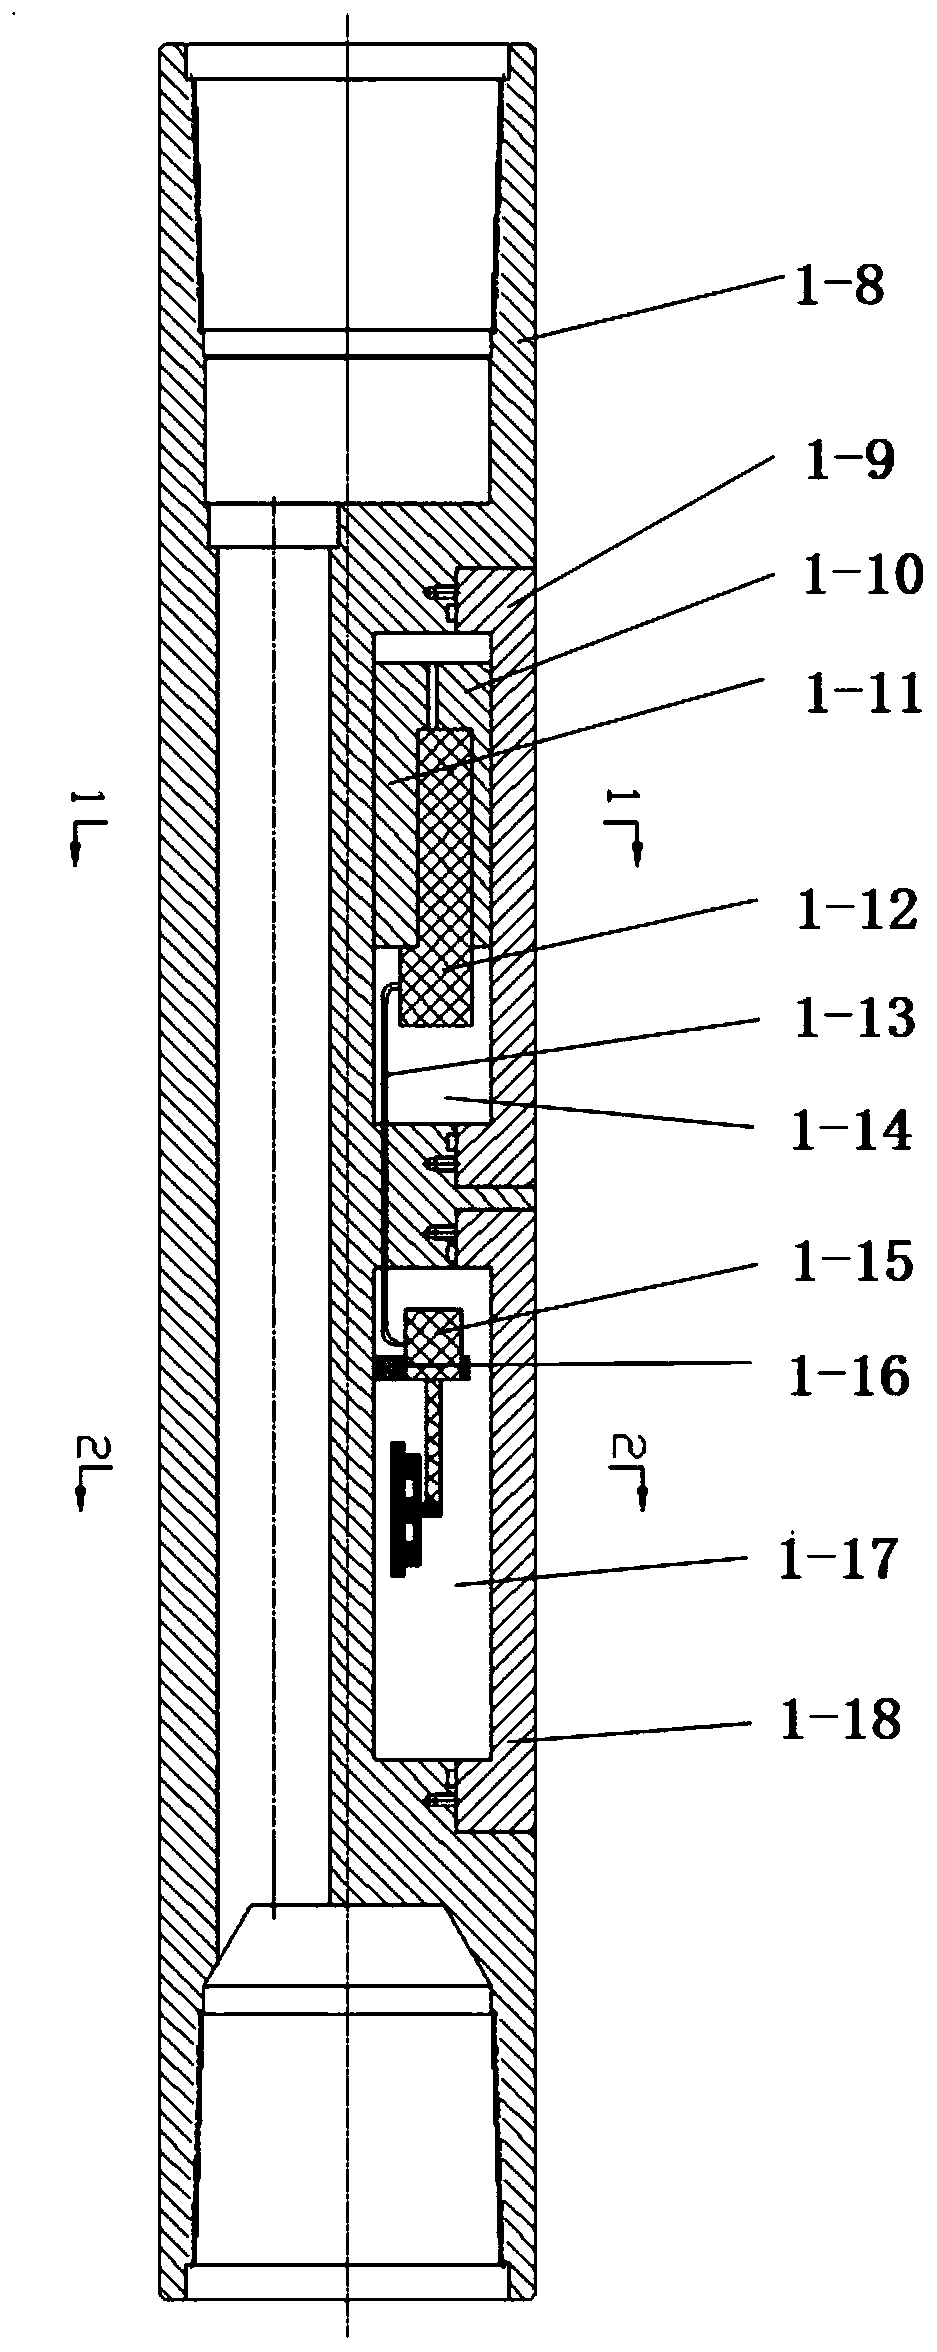 Logging-while-drilling underground circuit semiconductor positive cooling system and method